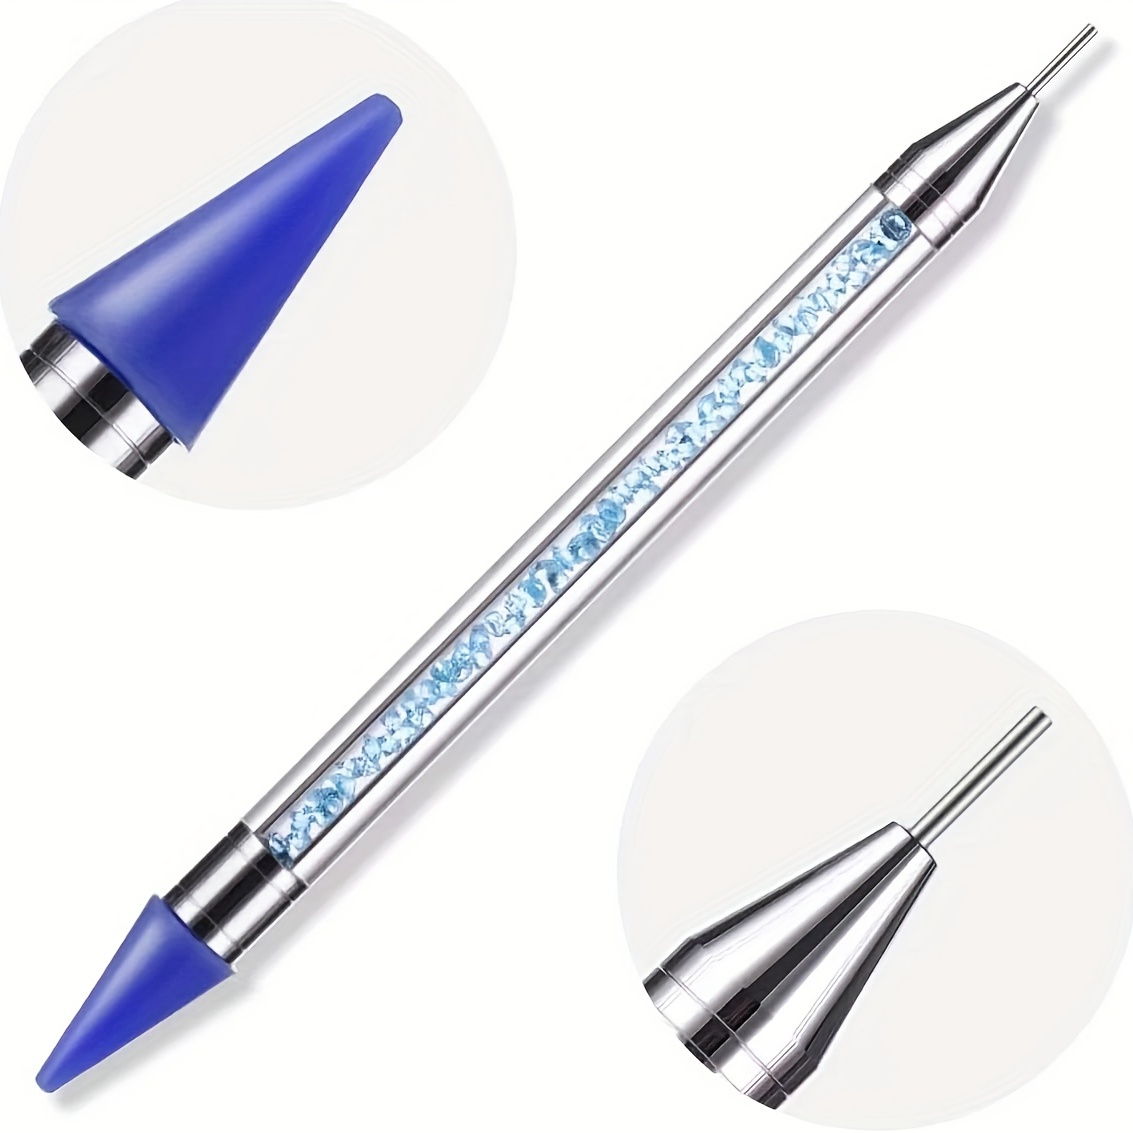  Diamond Painting Pens, No Wax Needed Diamond Painting Kits  Diamond Painting Tools, Self-Stick Drill Pen with Double Heads, 5D Diamond  Art Painting Accessories for Cross-Stitch Manicure and DIY